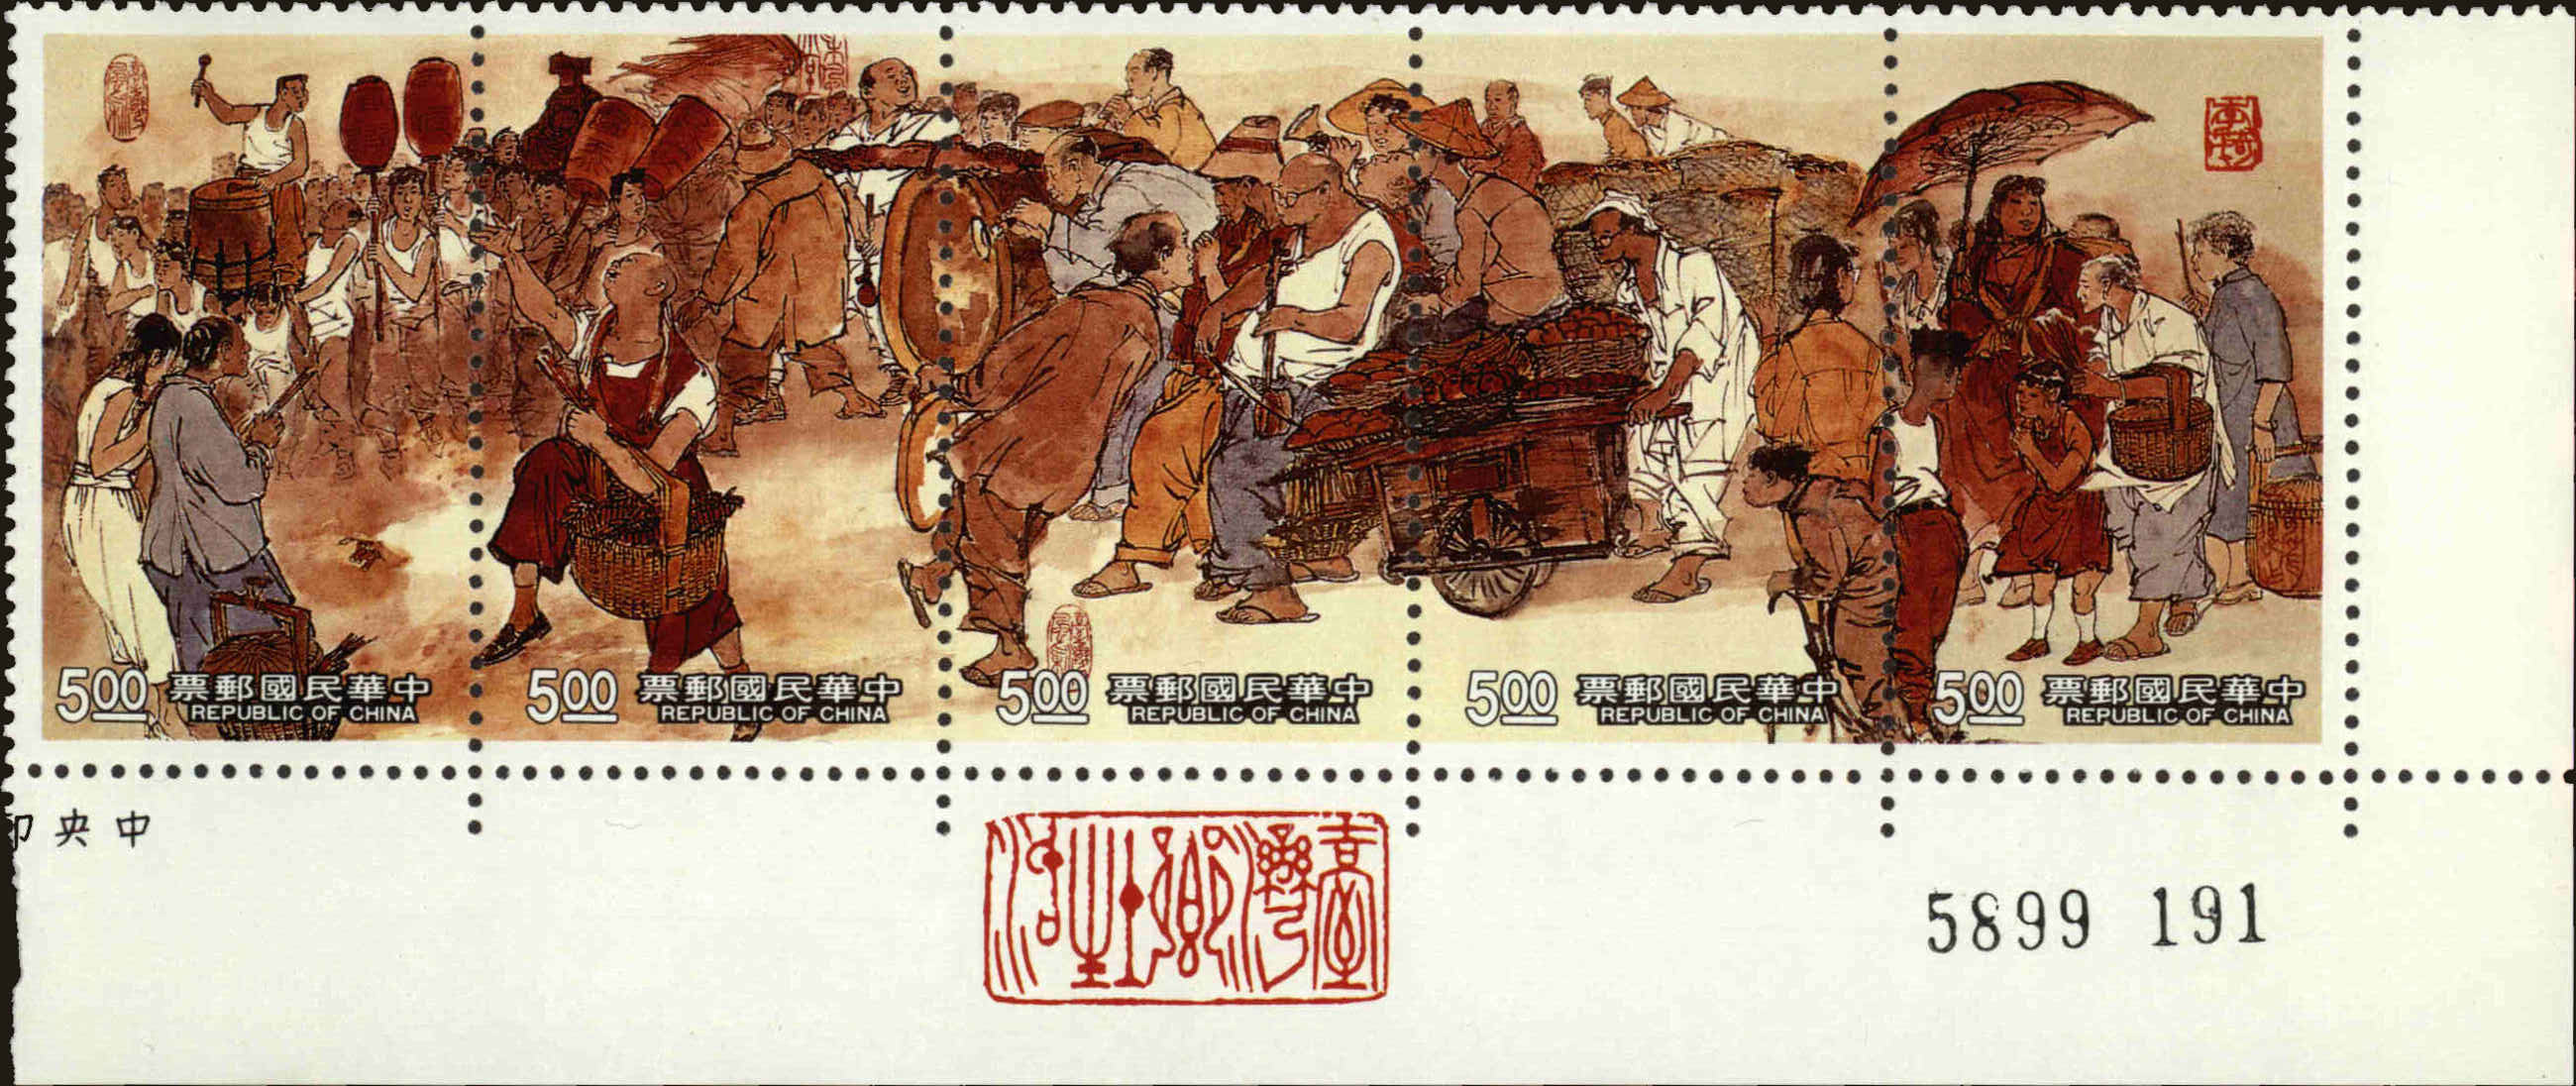 Front view of China and Republic of China 2860 collectors stamp